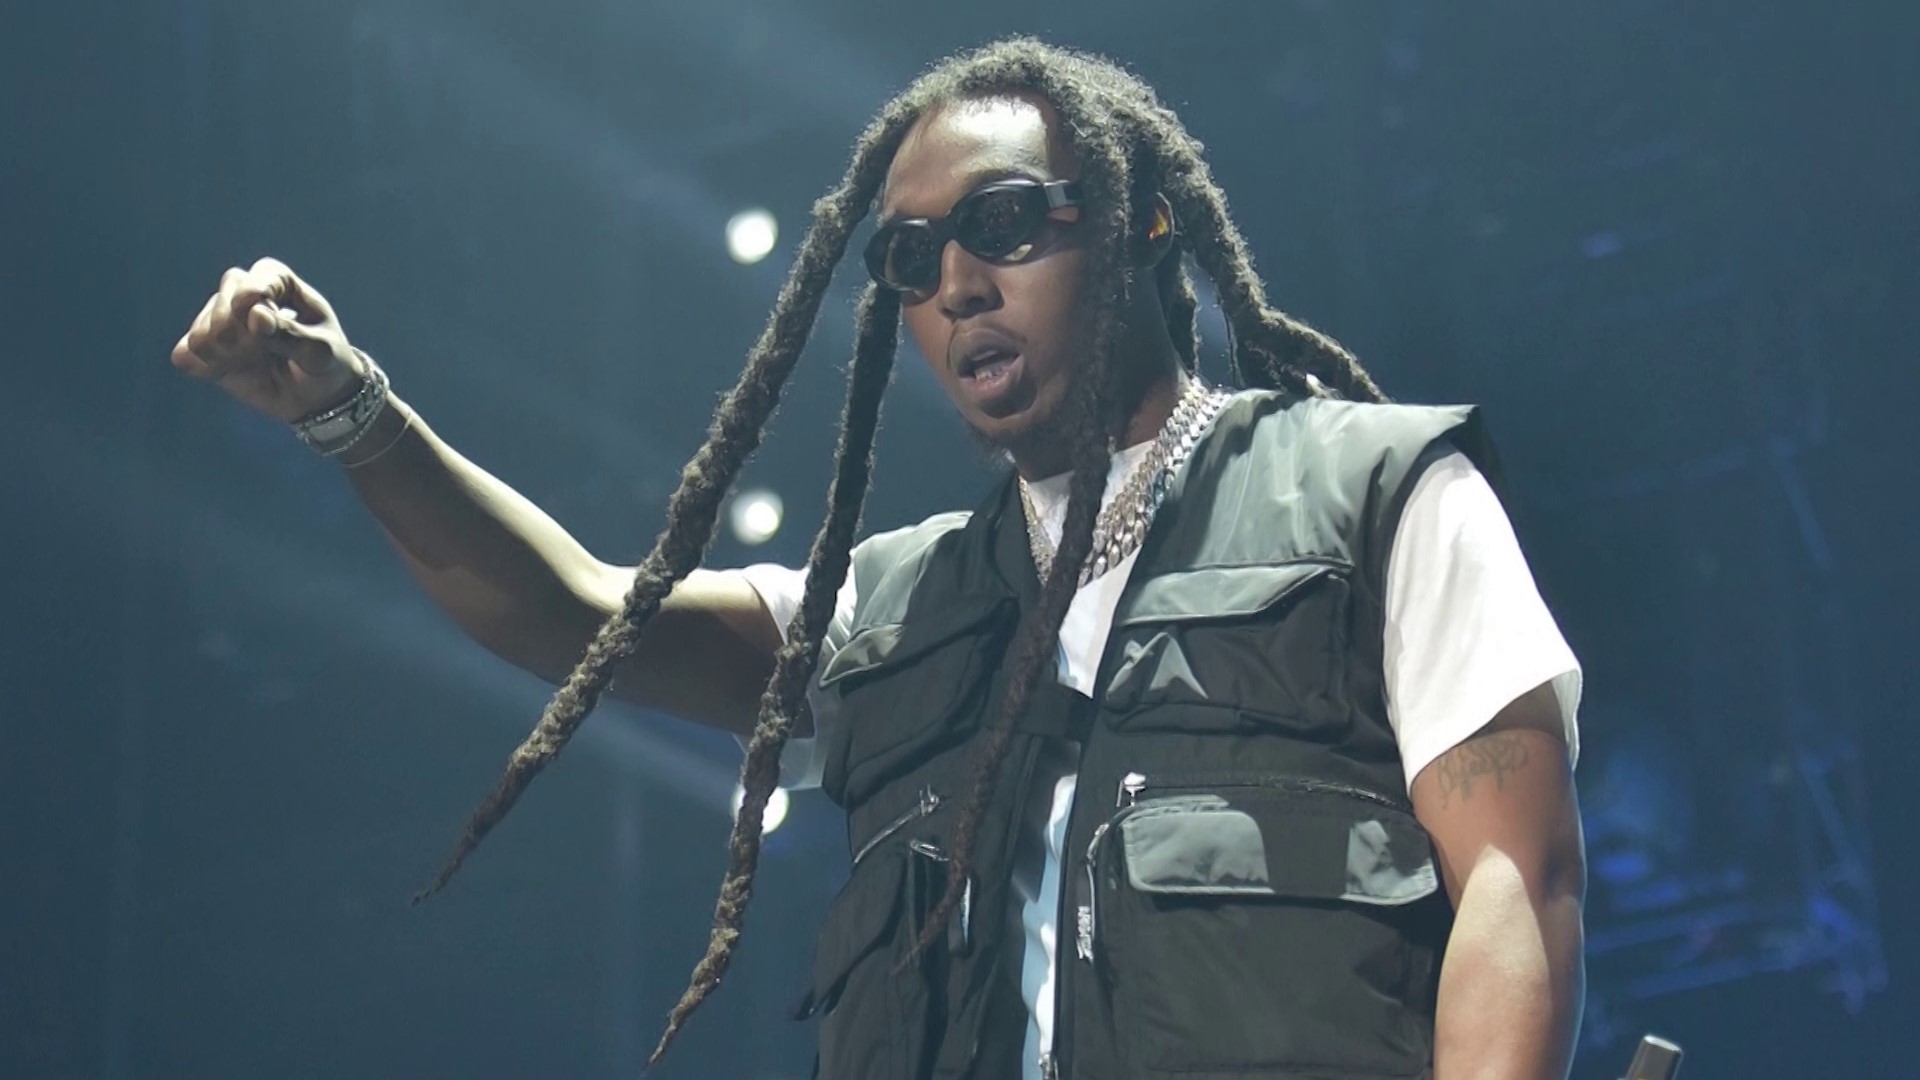 Takeoff becomes the latest casualty in a long list of rappers who have been murdered, including local Dallas rapper Mo3.